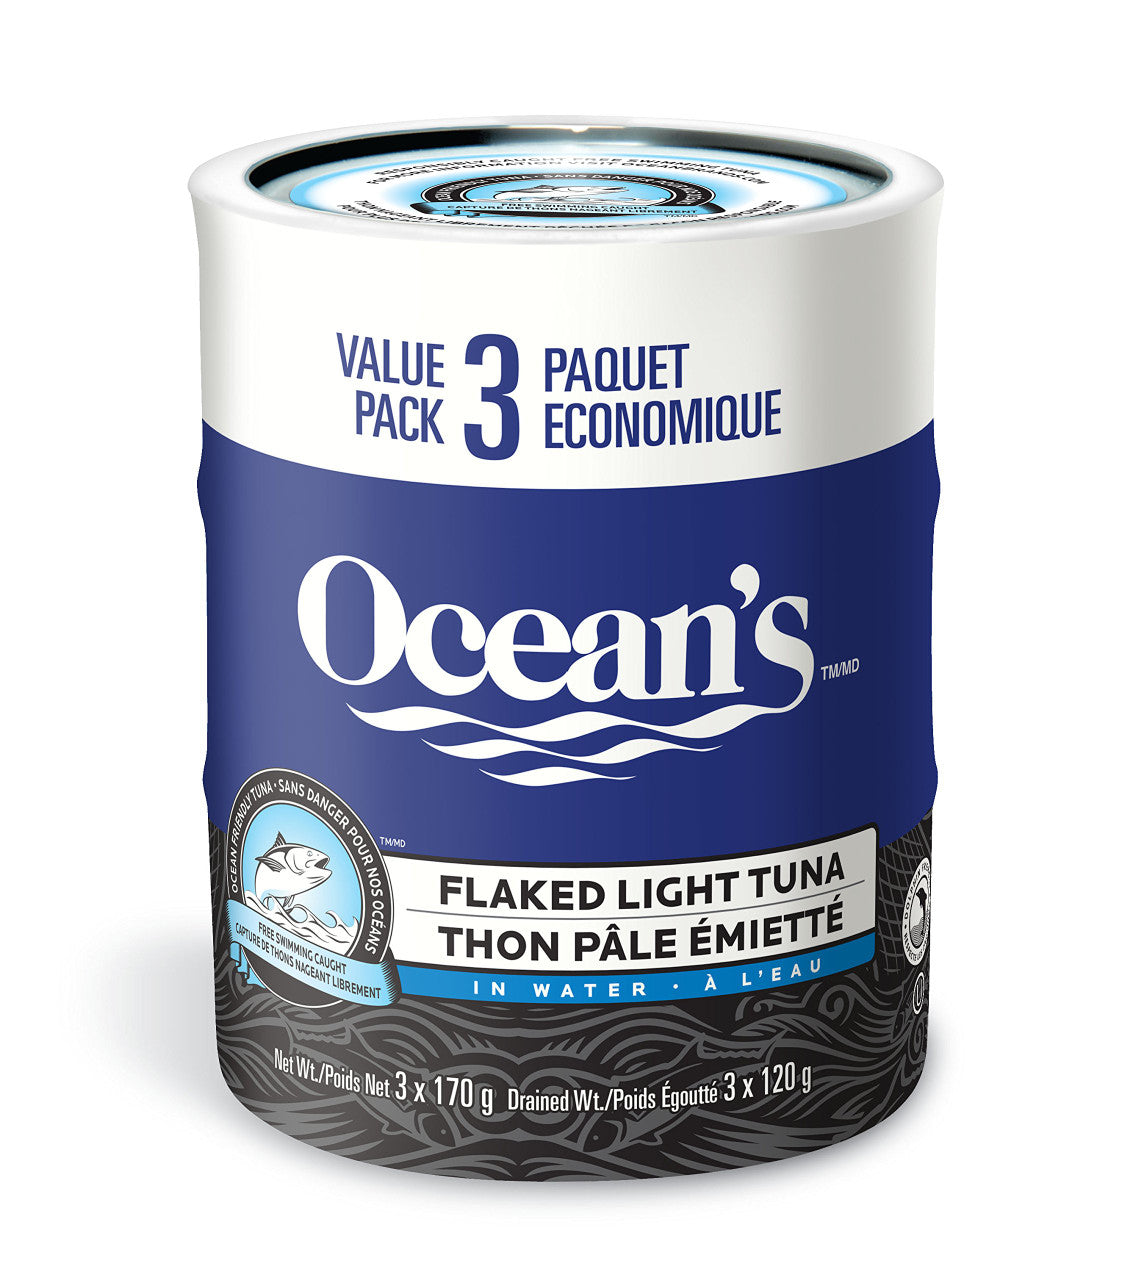 Ocean's Flaked Light Tuna in Water Multipack, 3-Count {Imported from Canada}